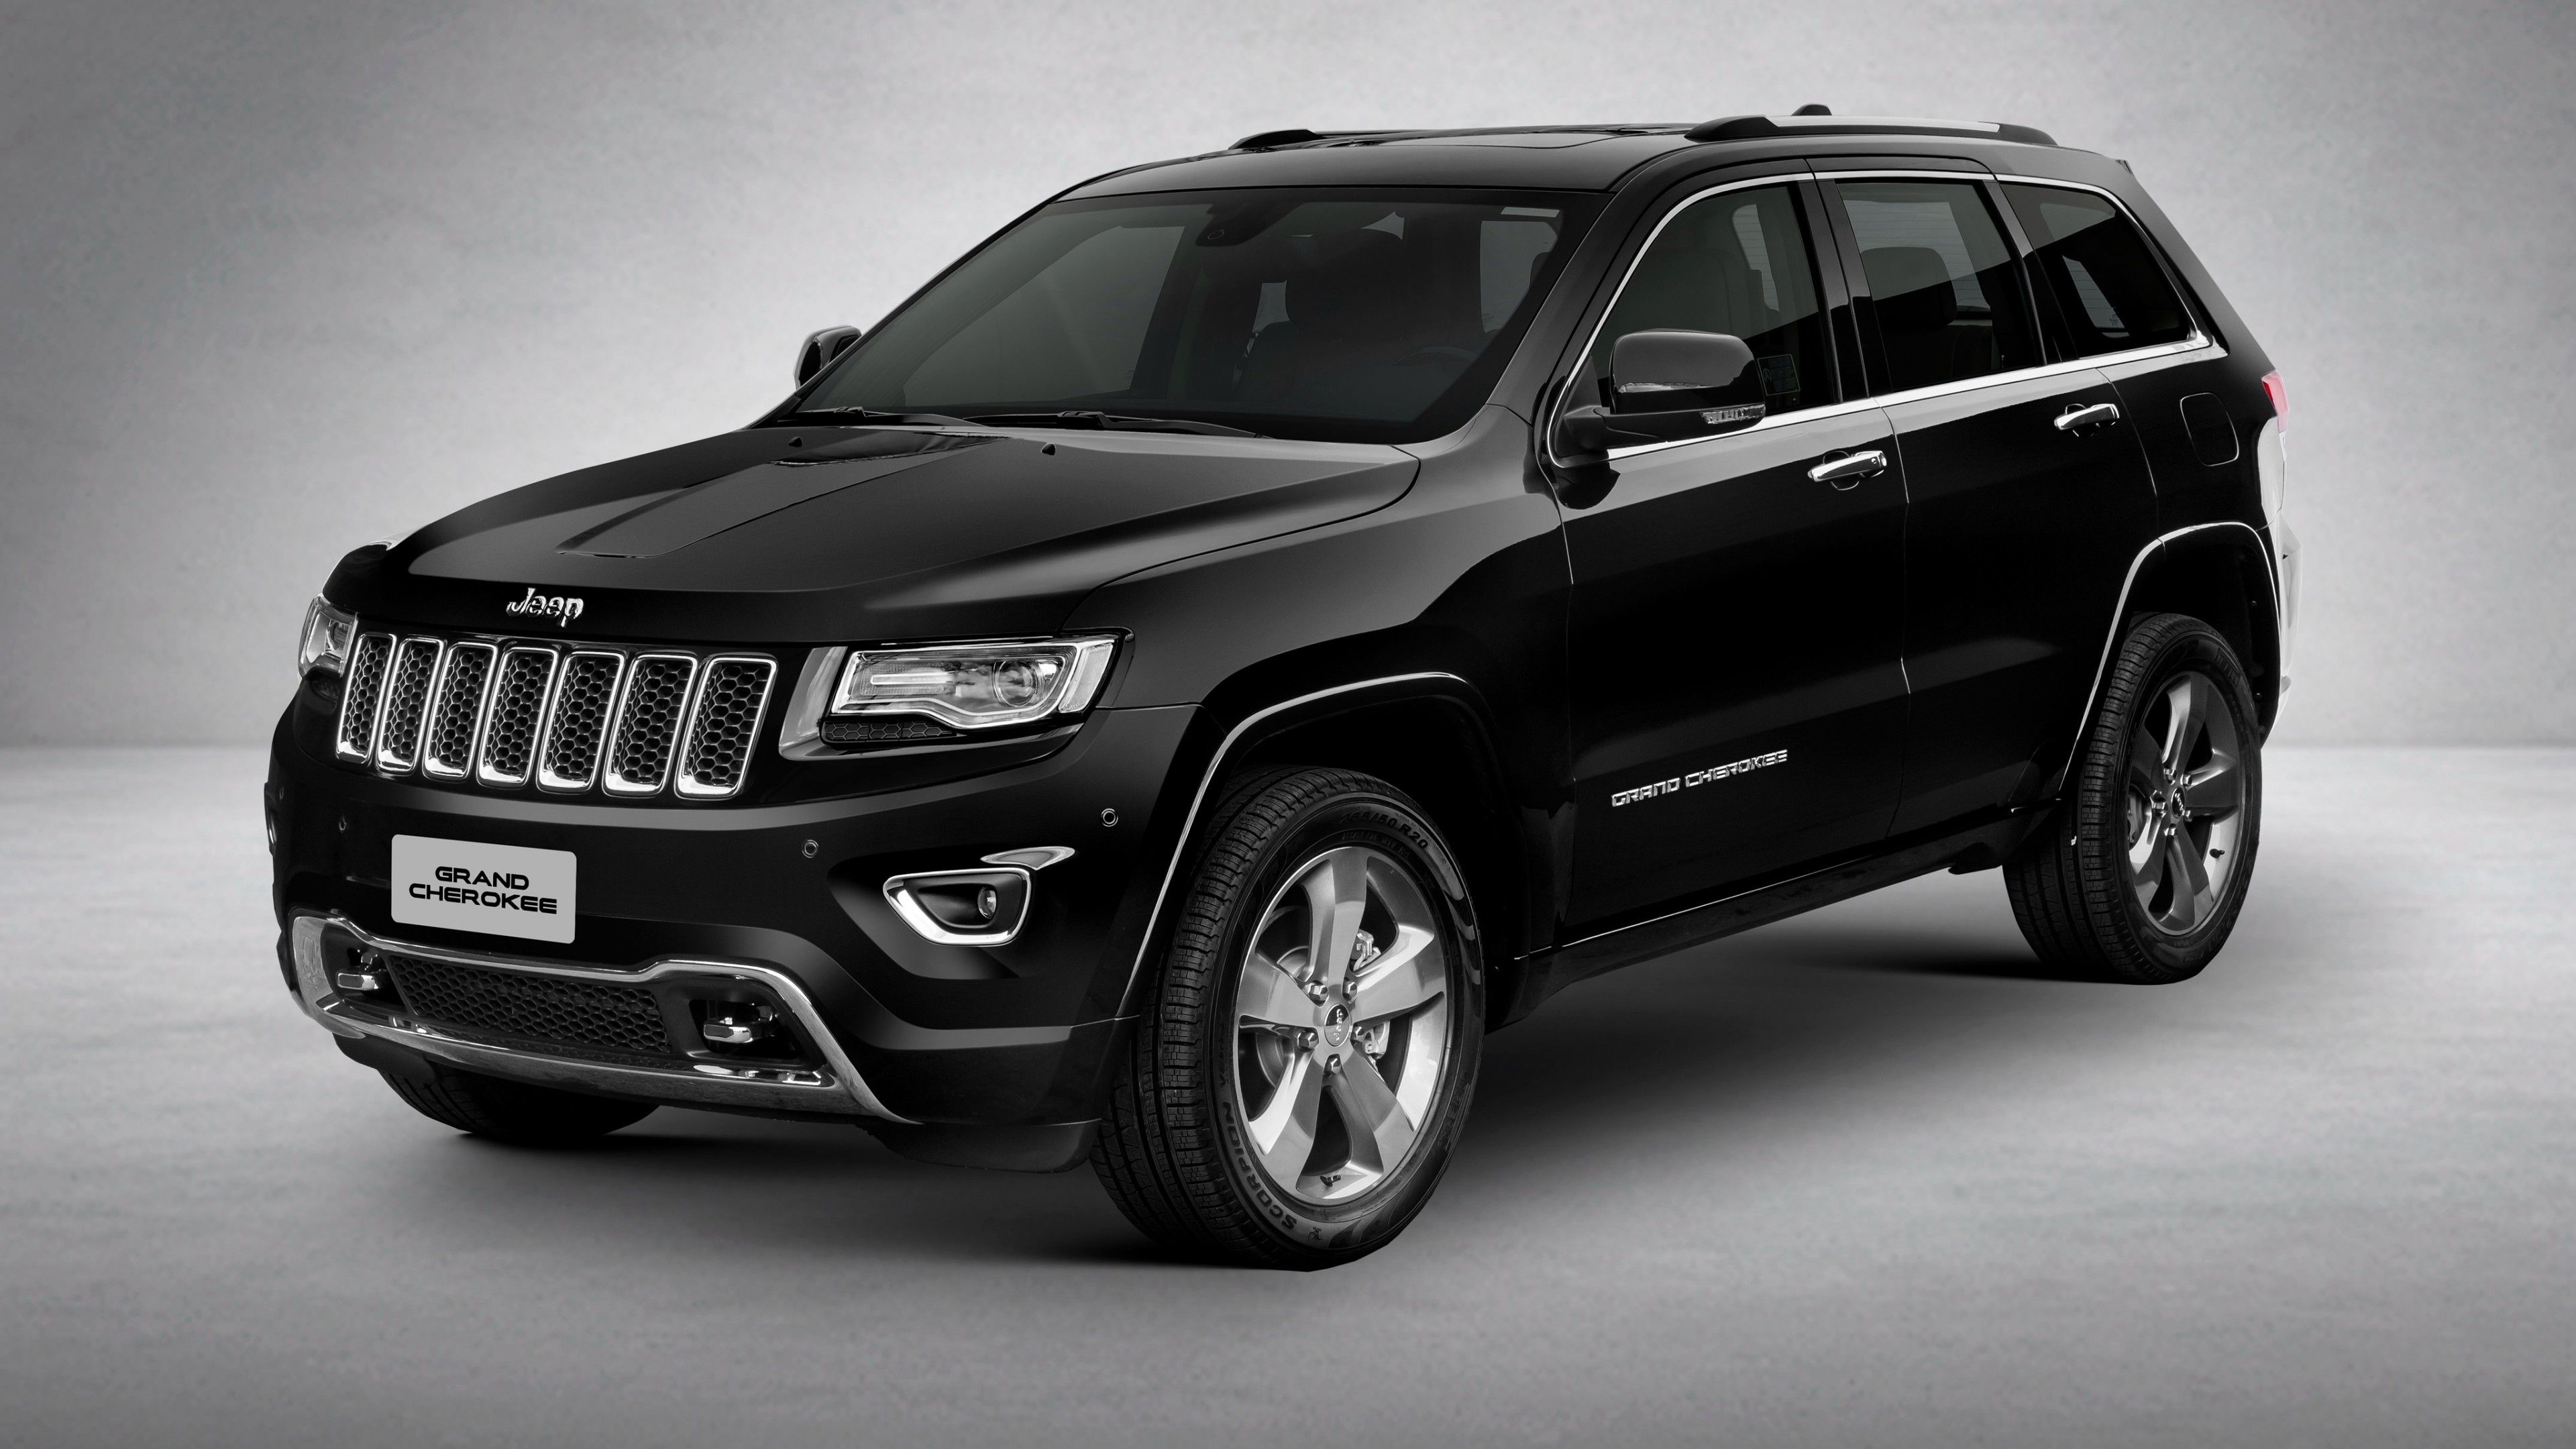 3840x2160 Download 3840x2160 Jeep Grand Cherokee Black Suv Side View Cars Wallpaper For Uhd Tv